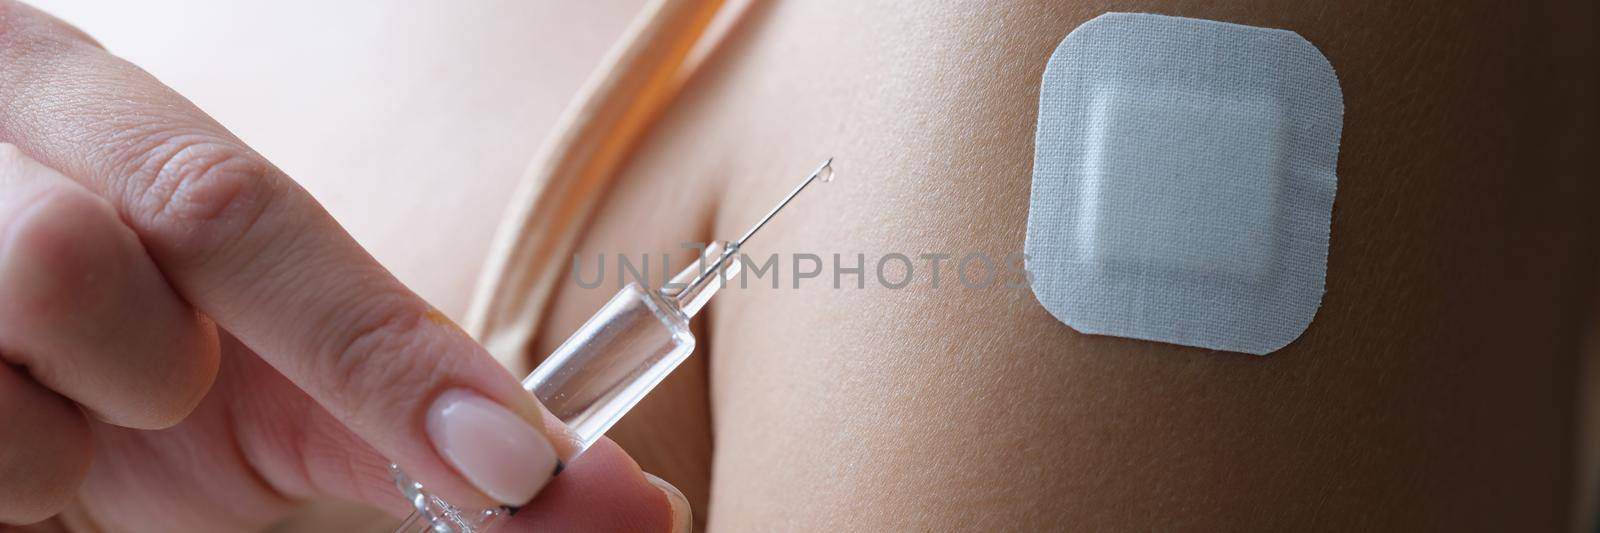 Close-up of female shoulder with patch. Woman holding injection syringe with transparent liquor. Vaccination, immunization against coronavirus and treatment concept